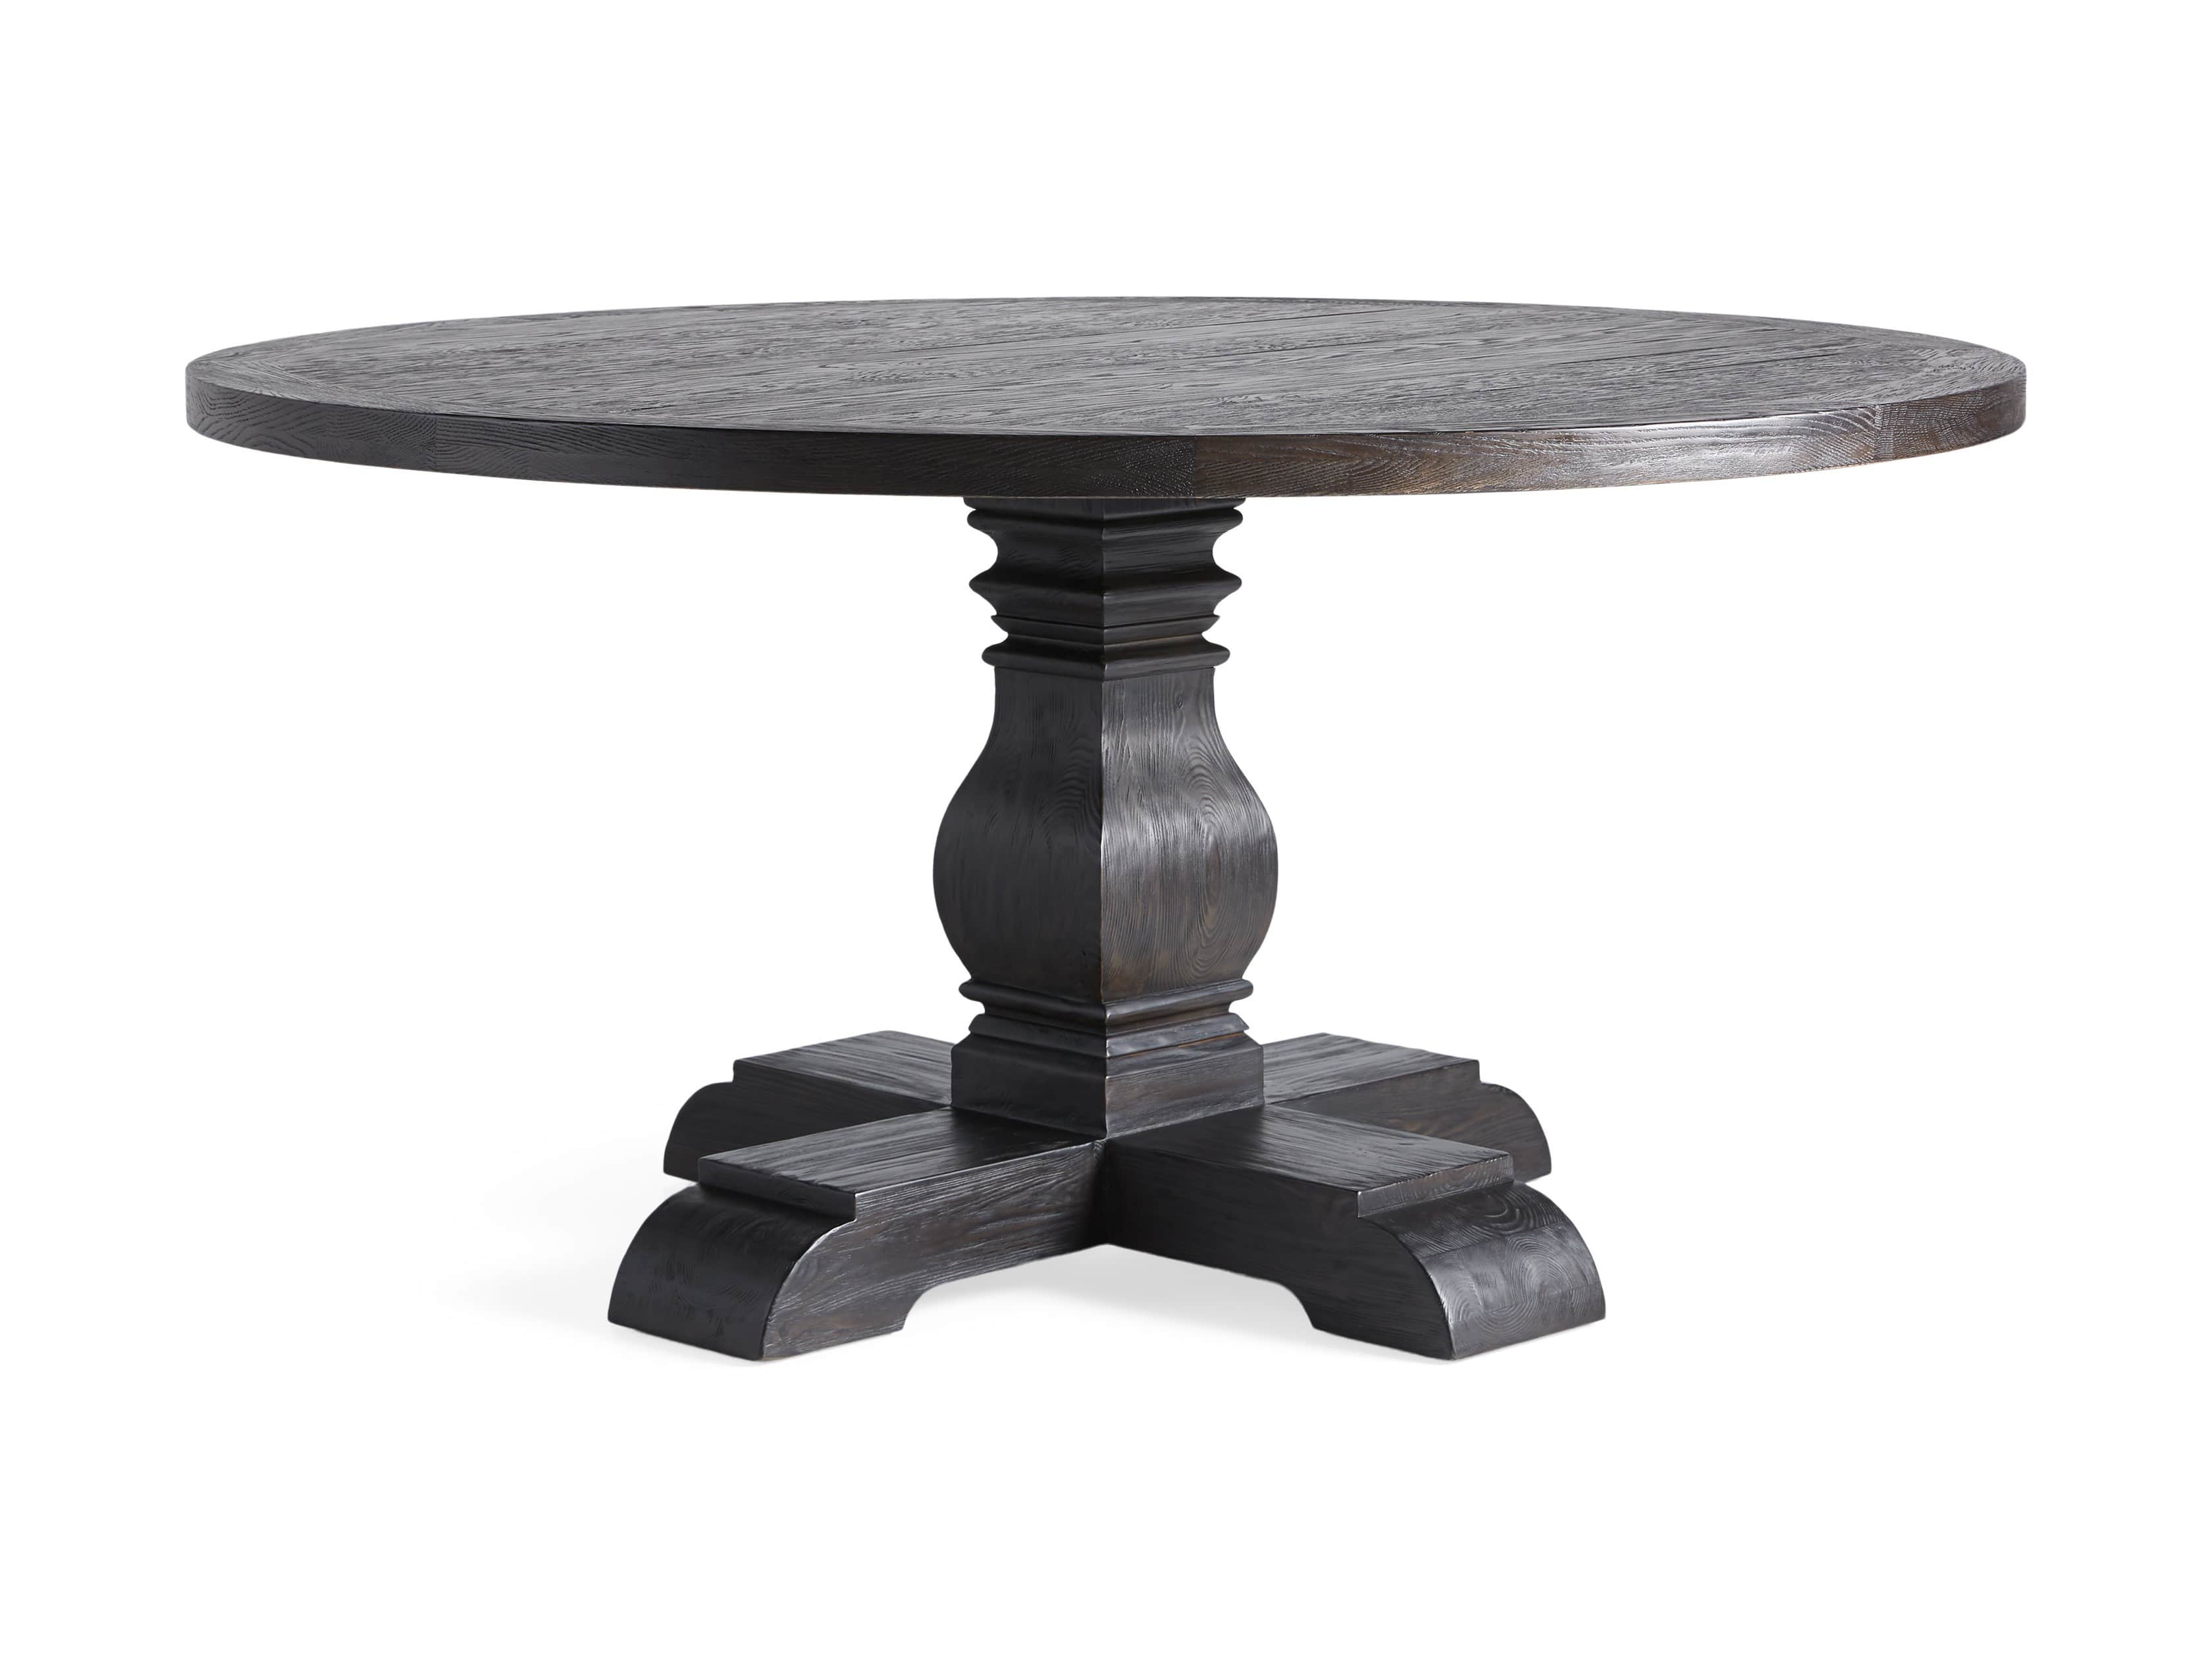 Kensington Round Dining Table Arhaus, 60 Round Dining Table Seats How Many